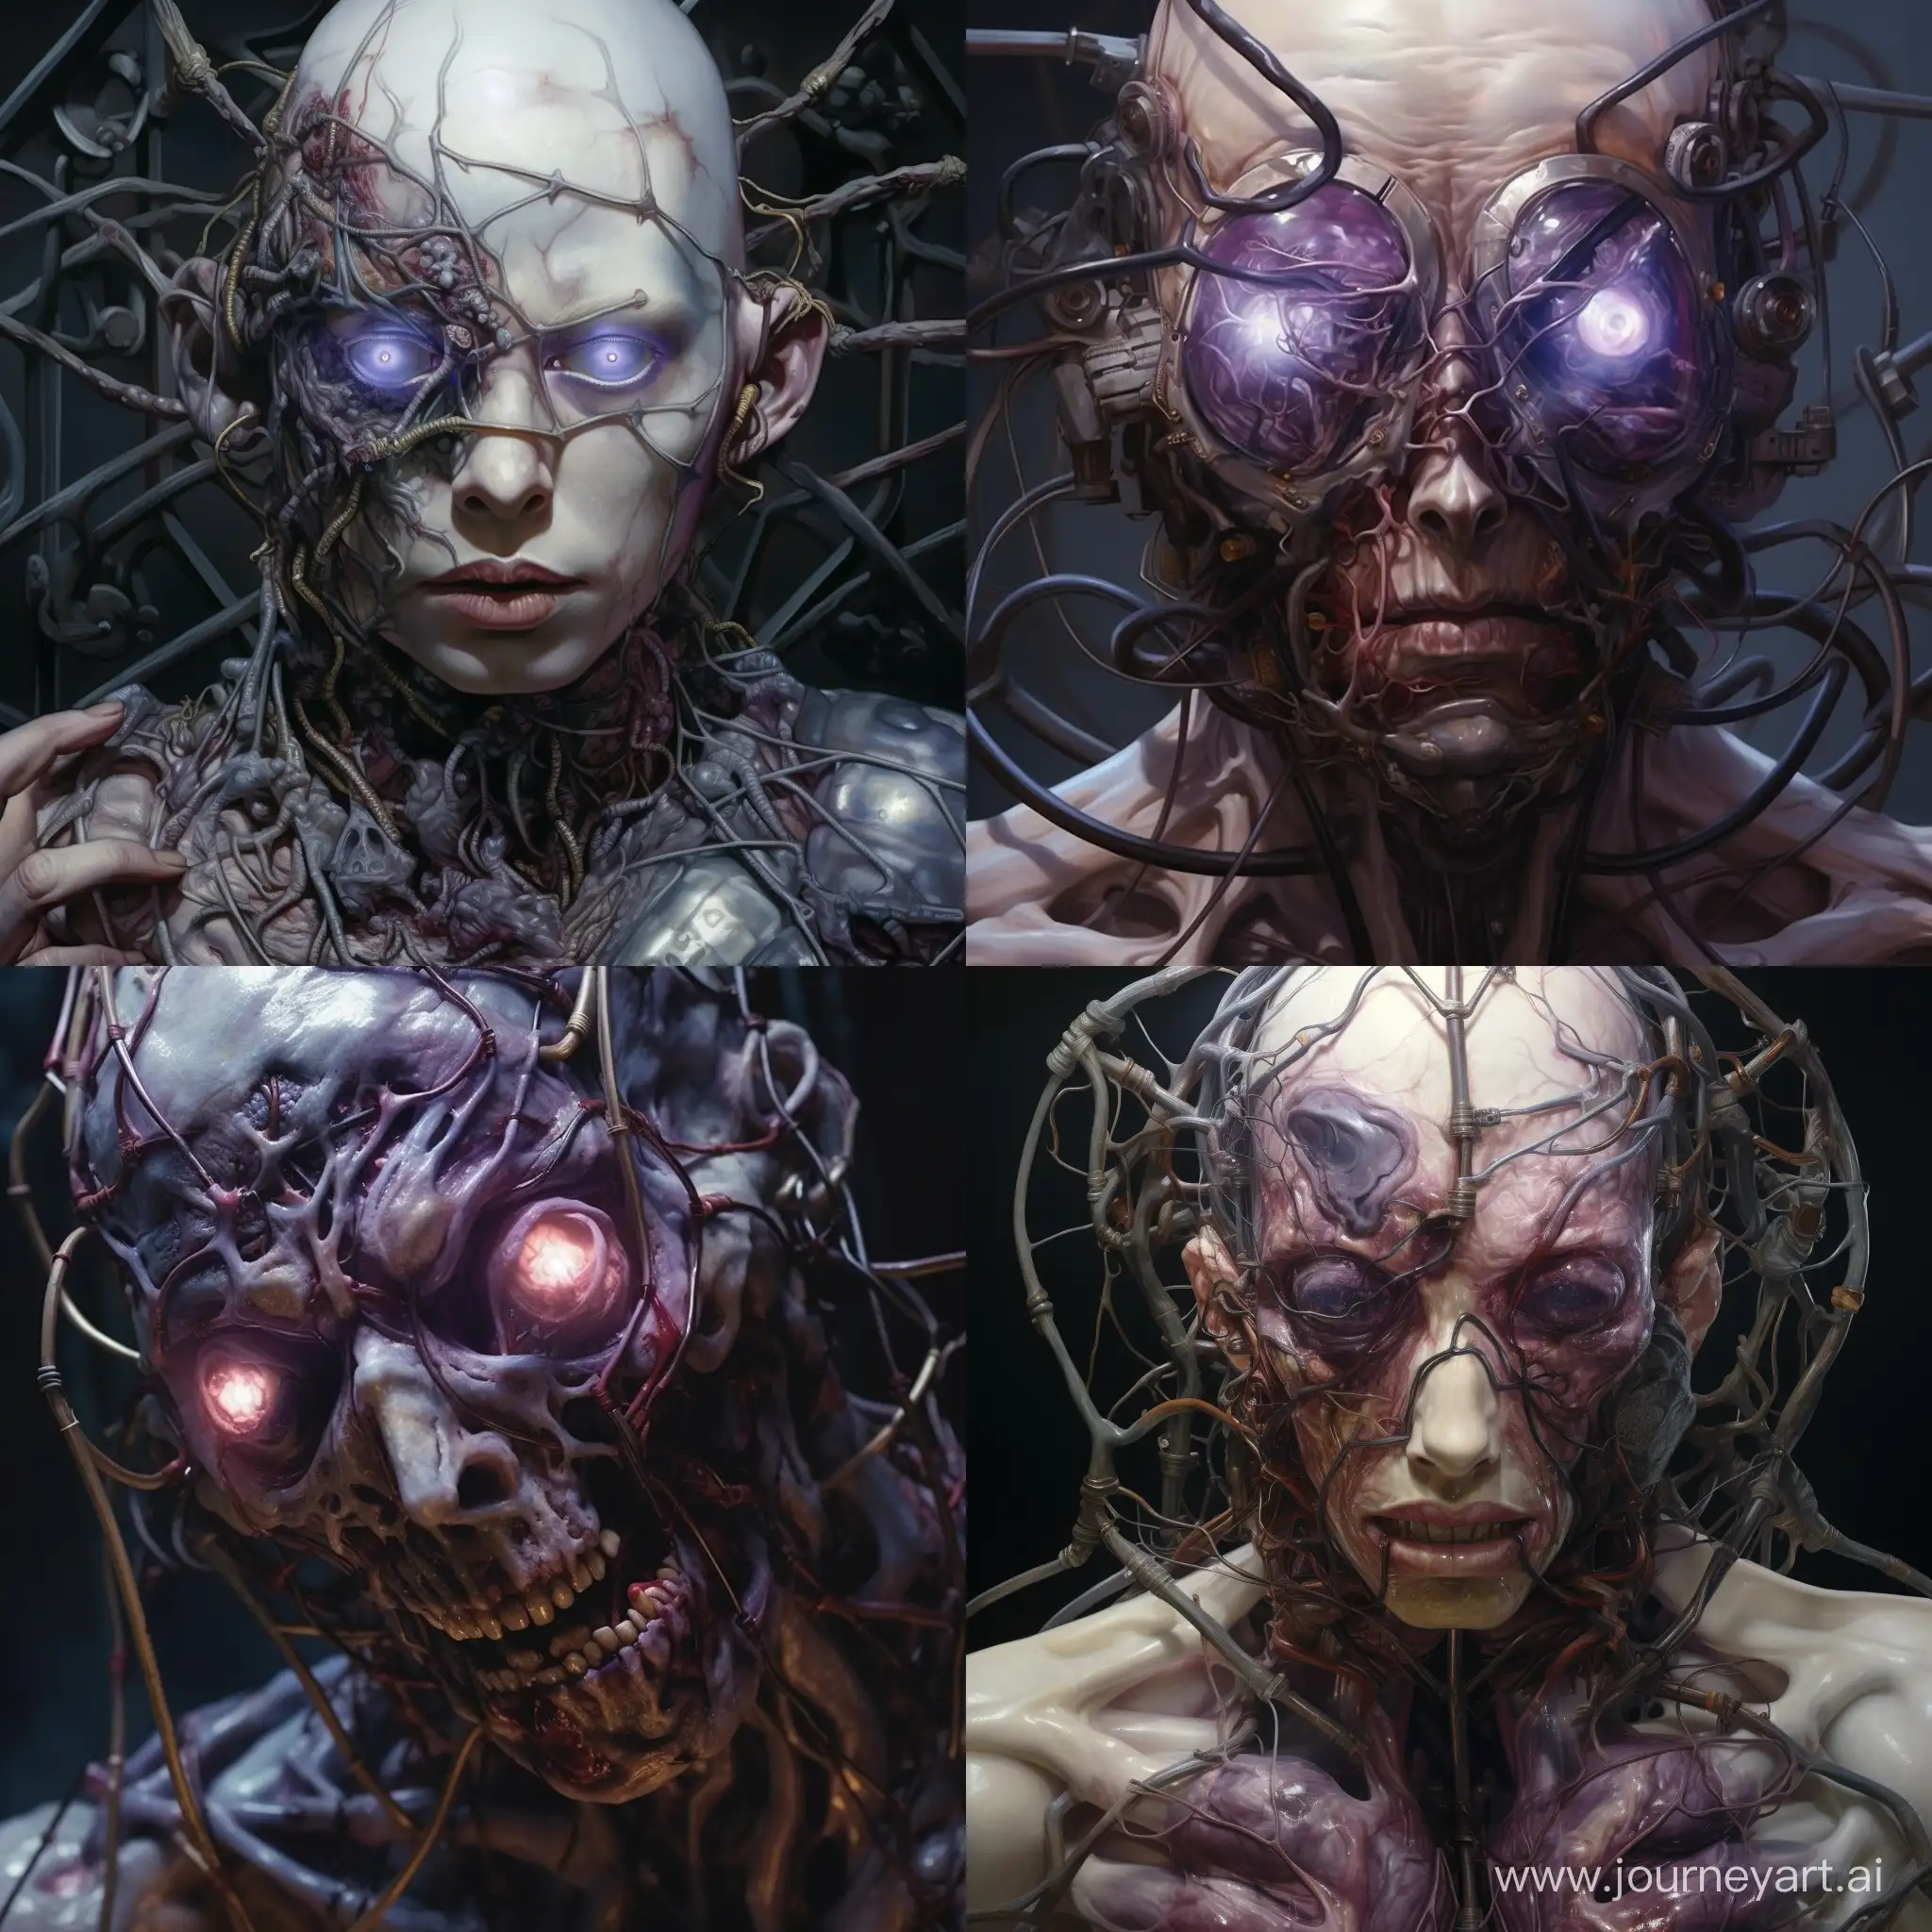 Photorealism. A zombie whose veins, eyes and heart glow with amber light. The heart is protected by a metal cage. The whites of the eyes are black, the skin is pale purple